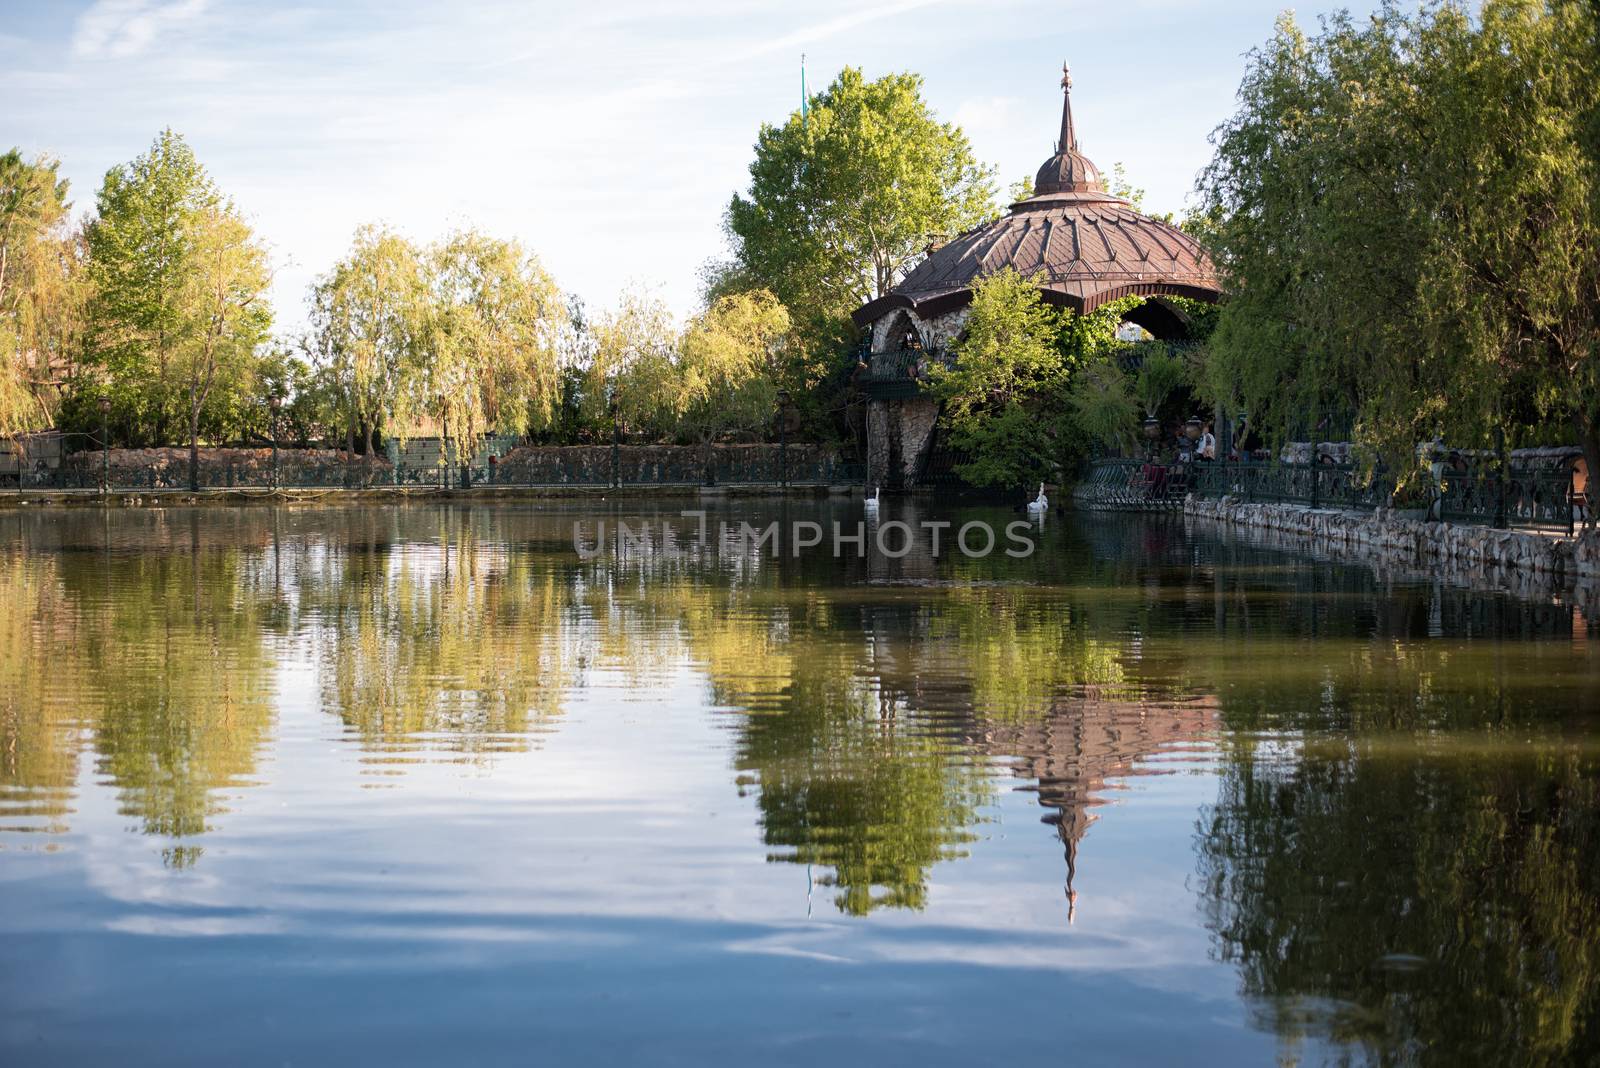 Beautiful lake with white swans, wrought iron fence and a green garden flowers and trees around. Outside, a park with birds and animals. Water, enchanting lake. Fairy lake and footbridges surrounded with trees.